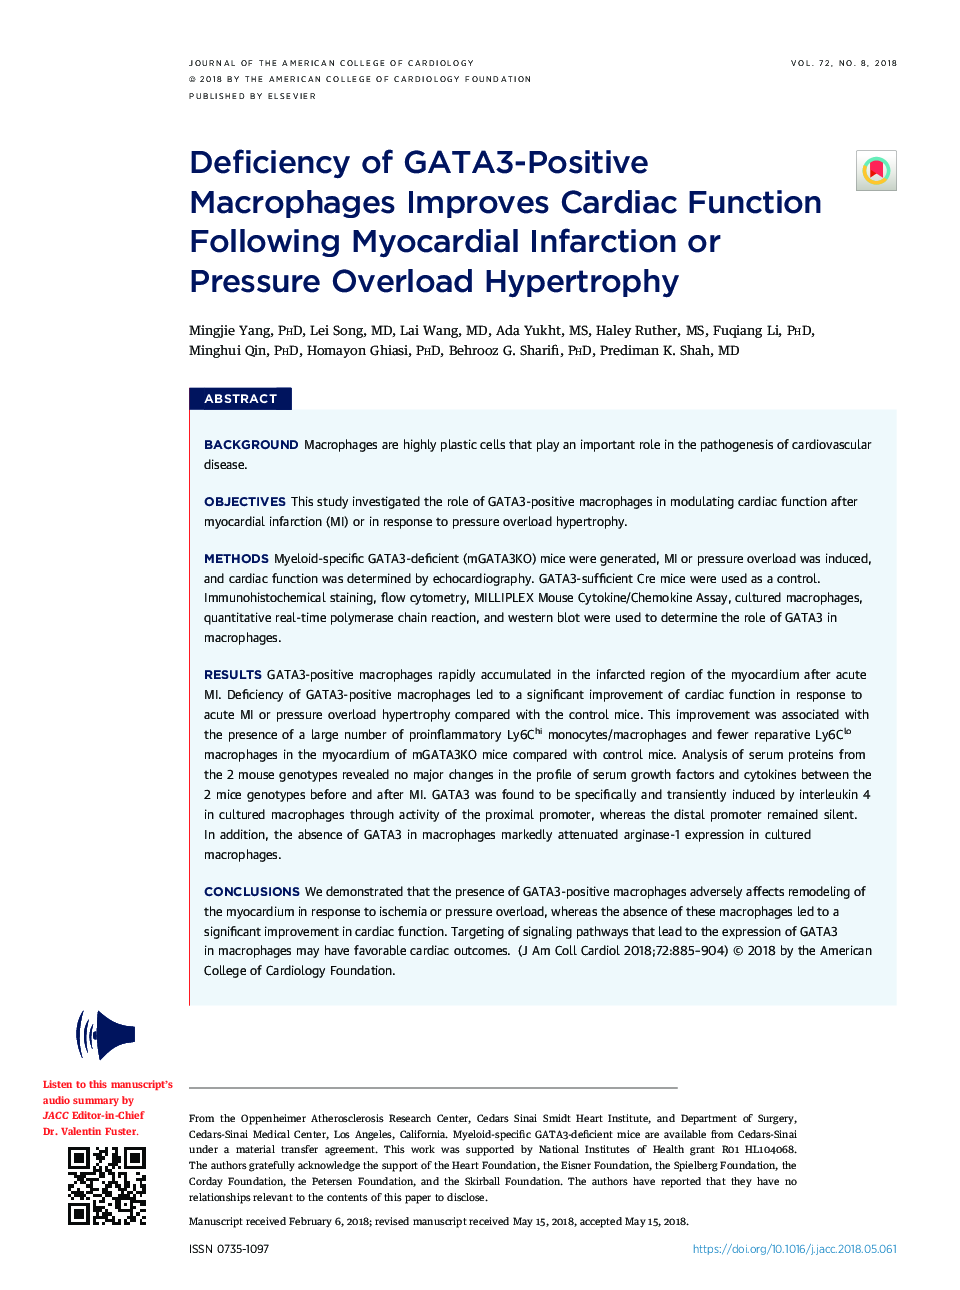 Deficiency of GATA3-Positive Macrophages Improves Cardiac Function Following MyocardialÂ Infarction or Pressure Overload Hypertrophy